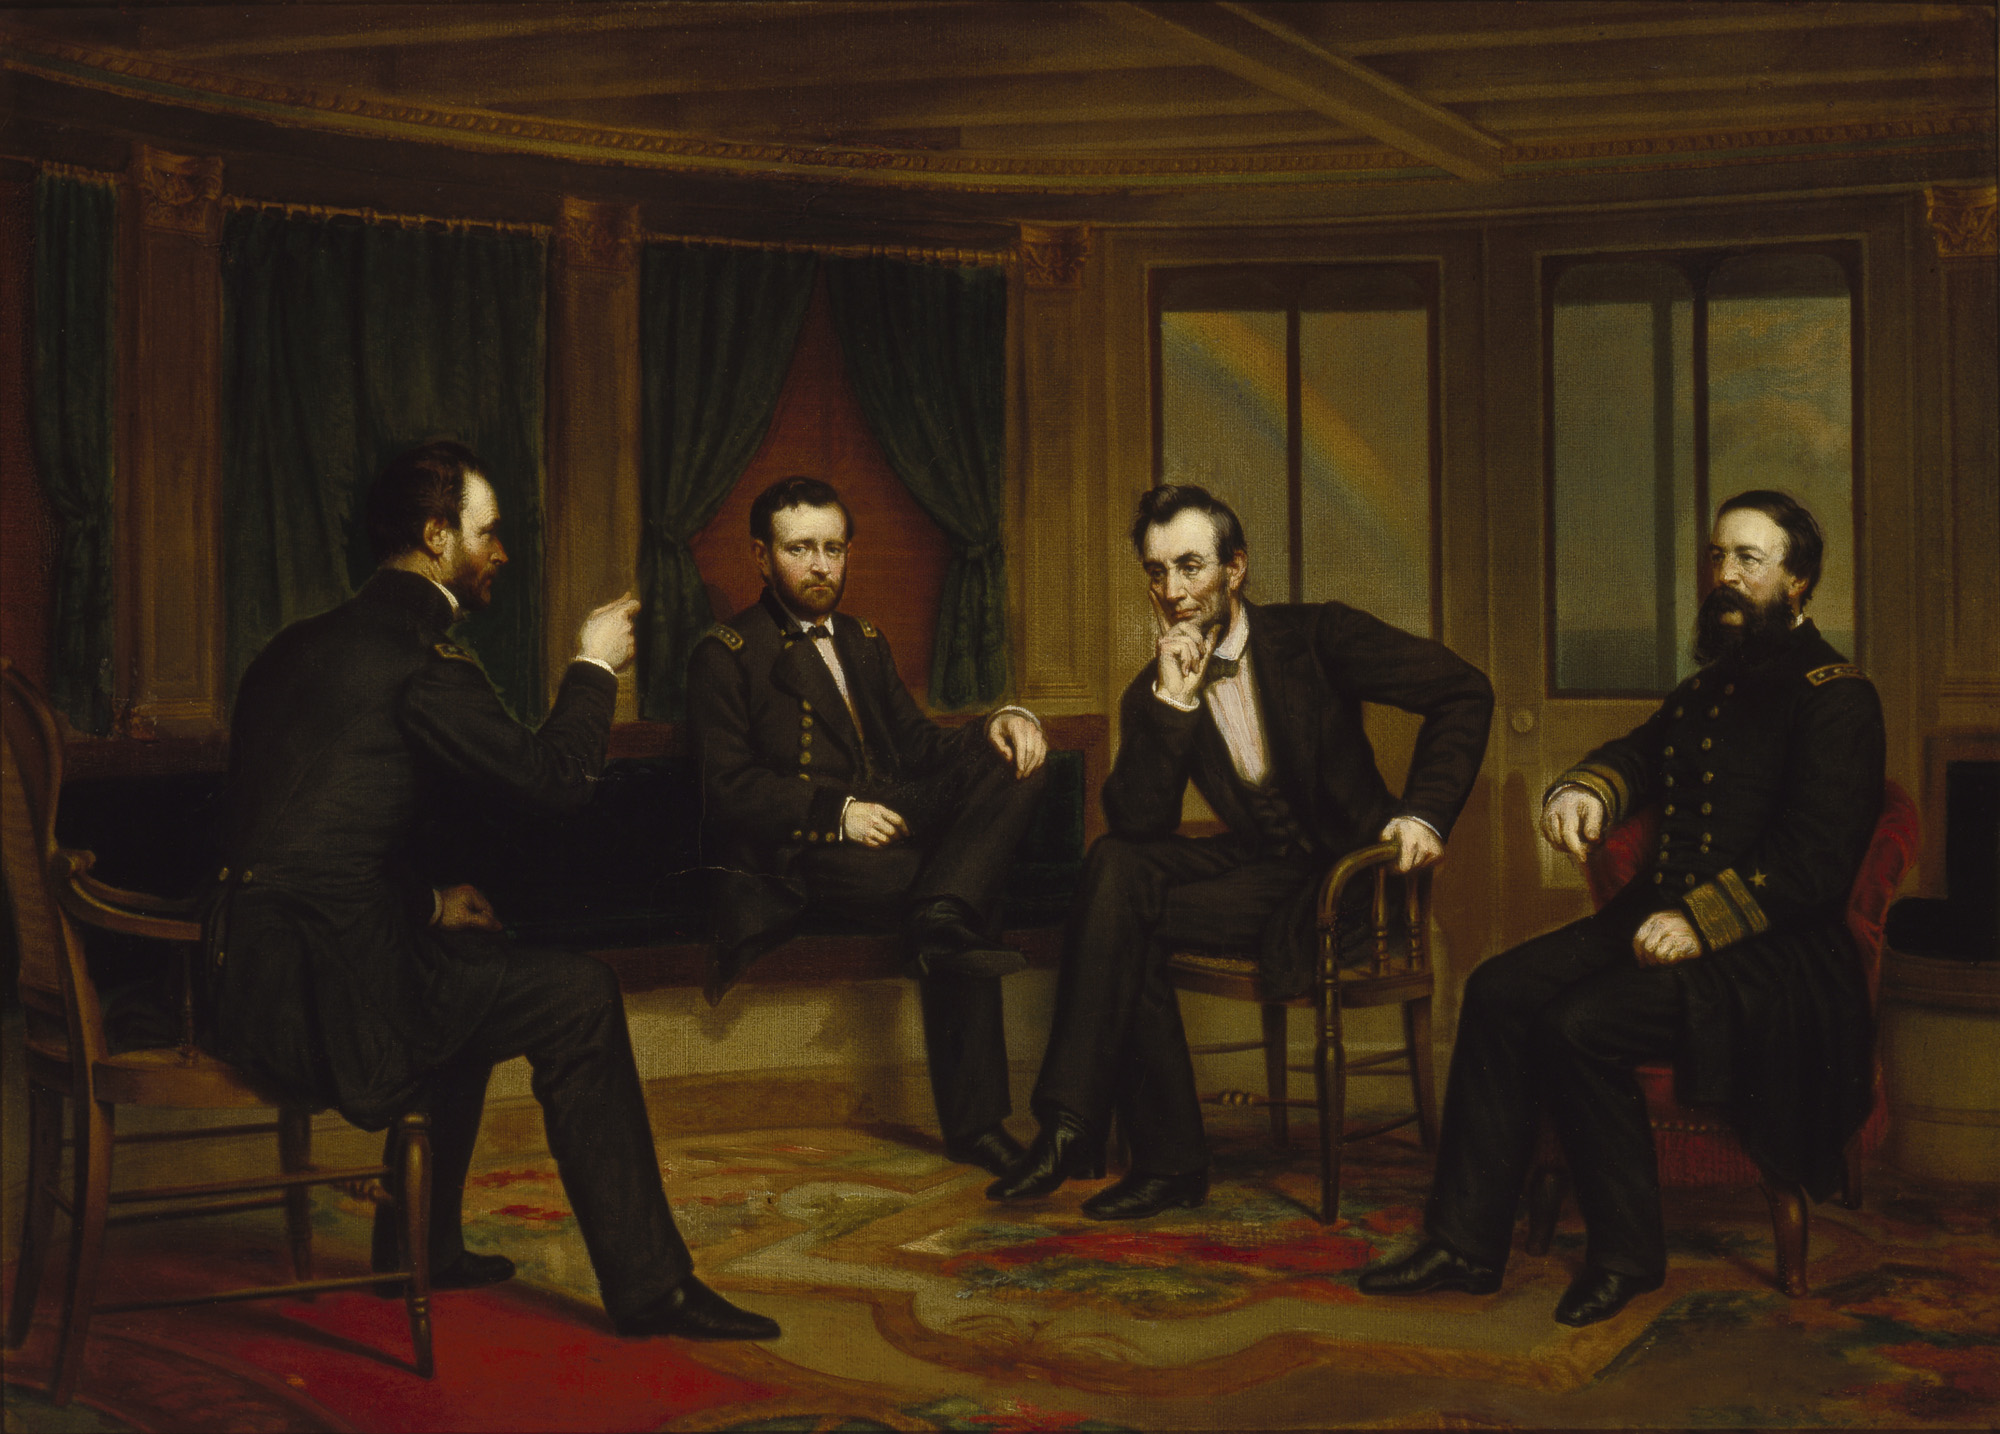 George P. A. Healy, <em>The Peacemakers</em>, 1868, oil on canvas, 31 1/2 x 39 1/4 inches (Chicago History Museum)